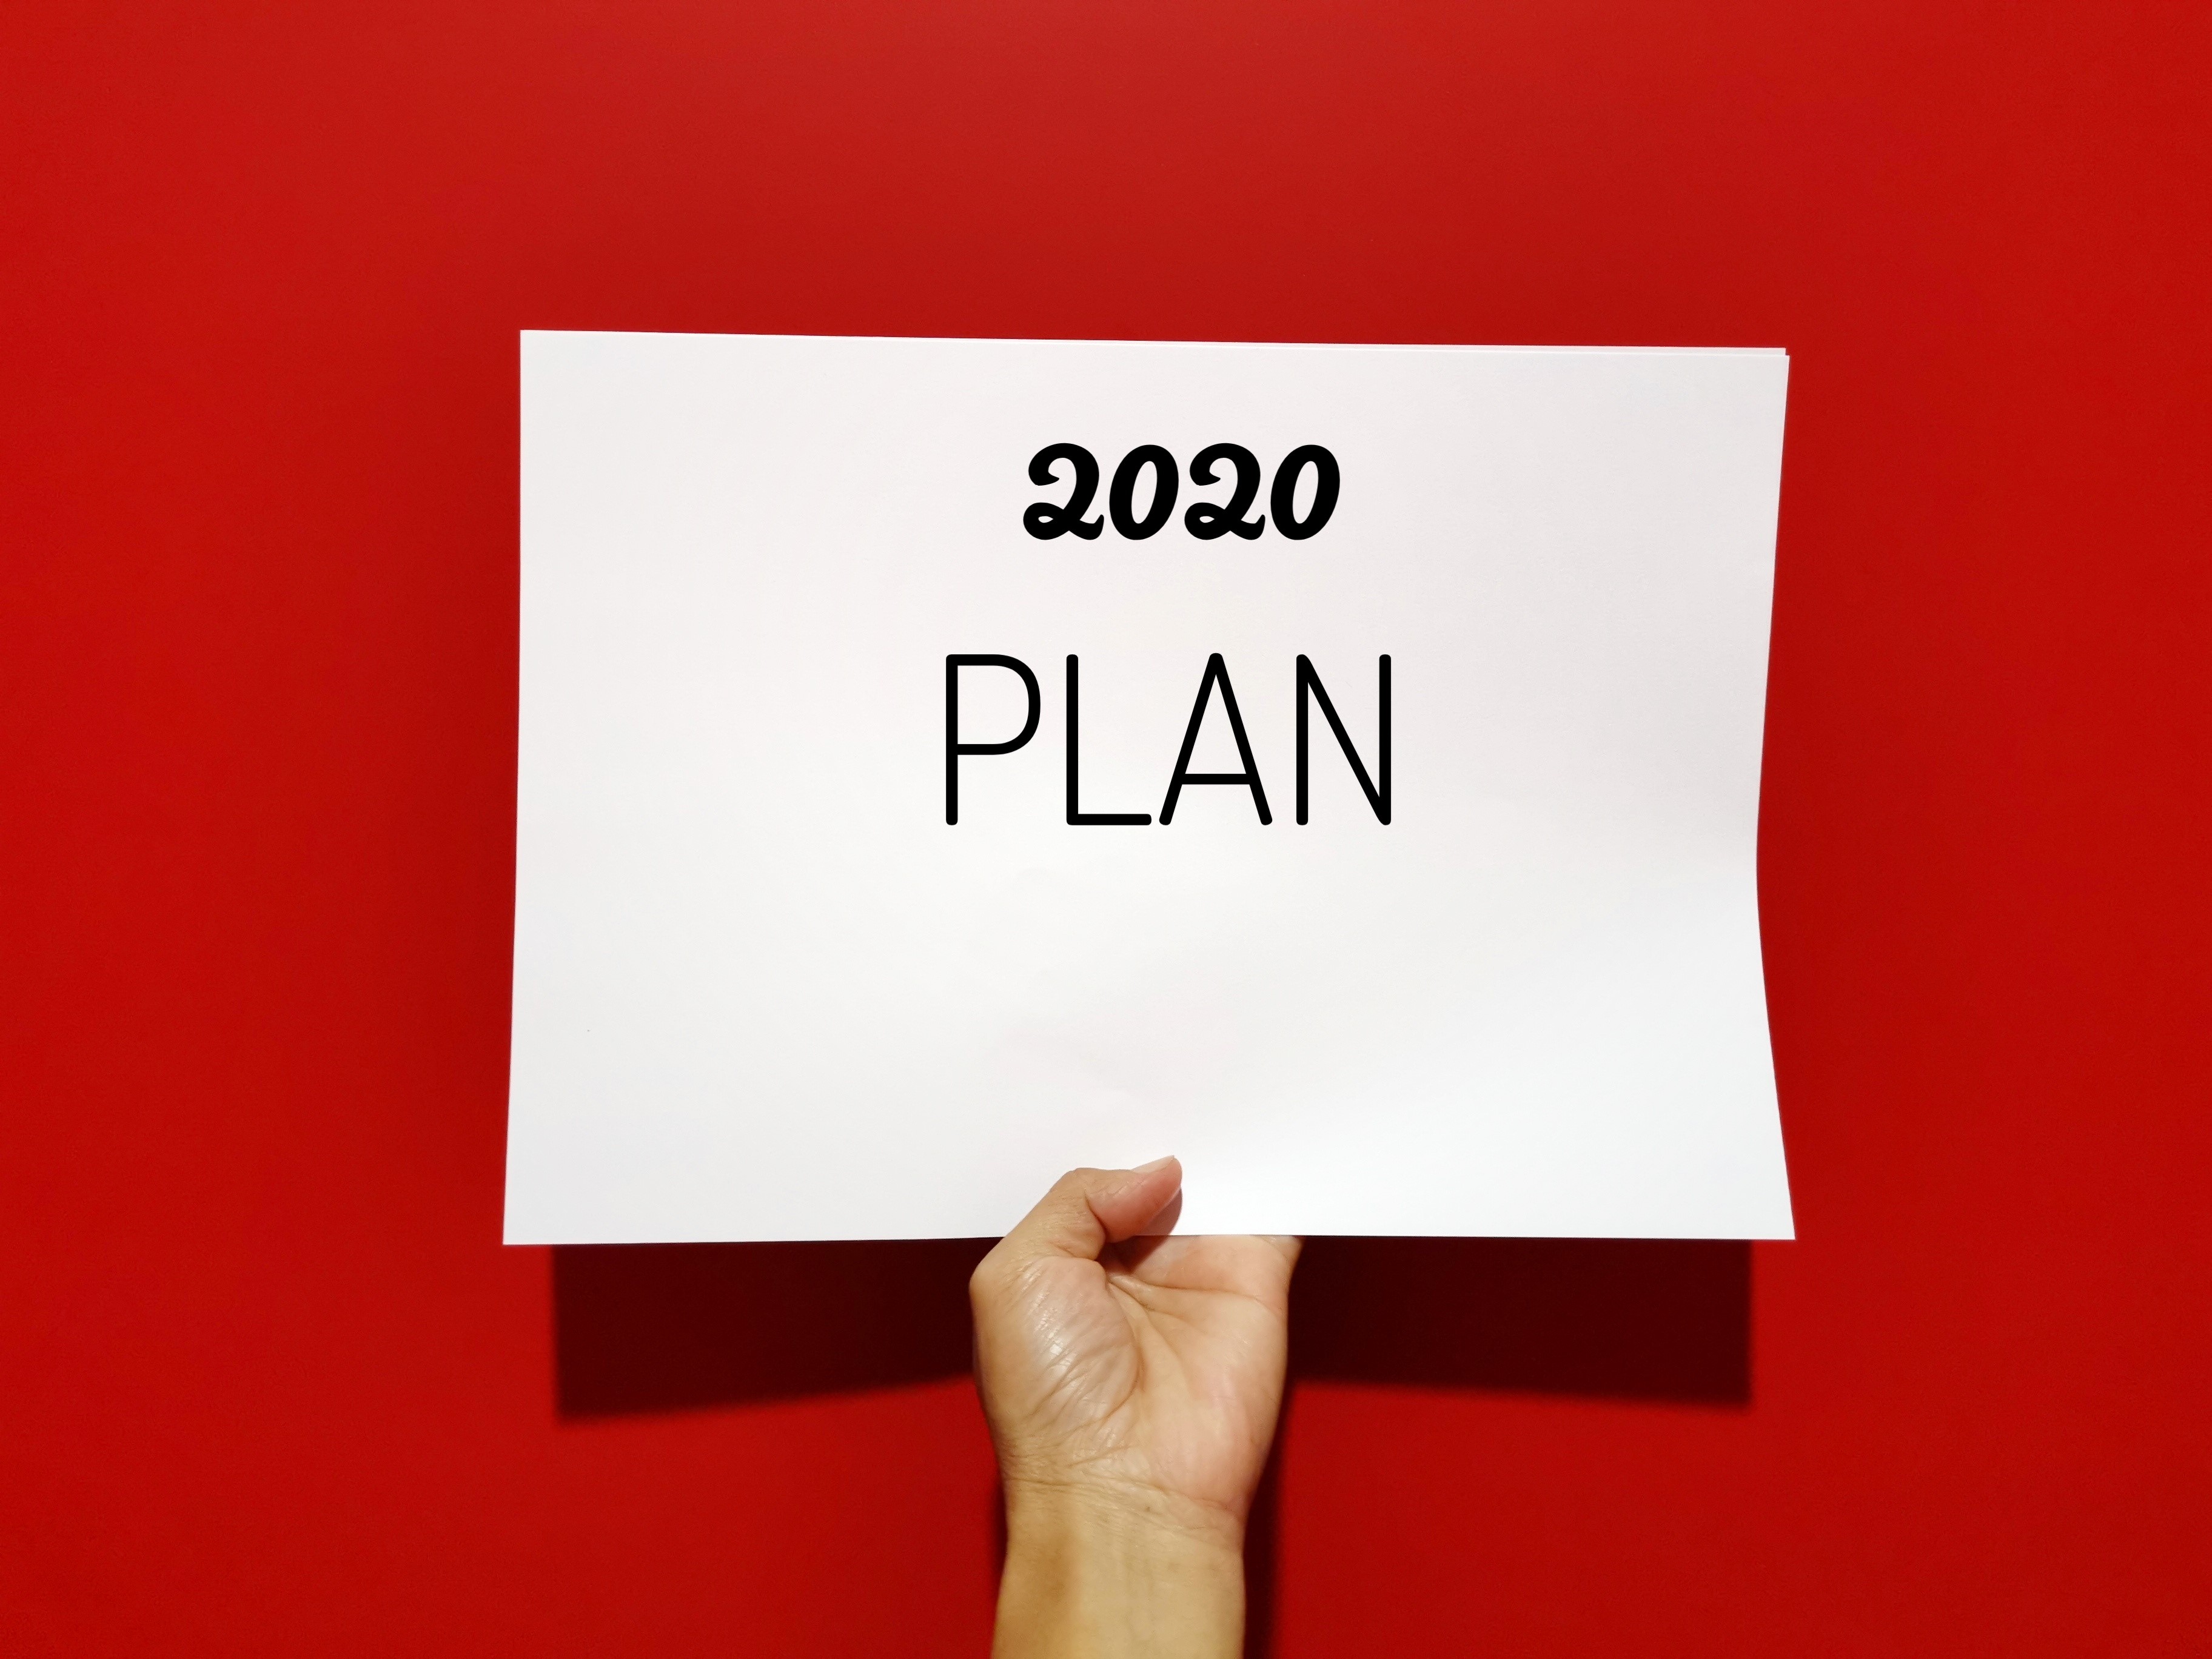 A hand holding up a white sign against a red background that says 2020 Plan in black.